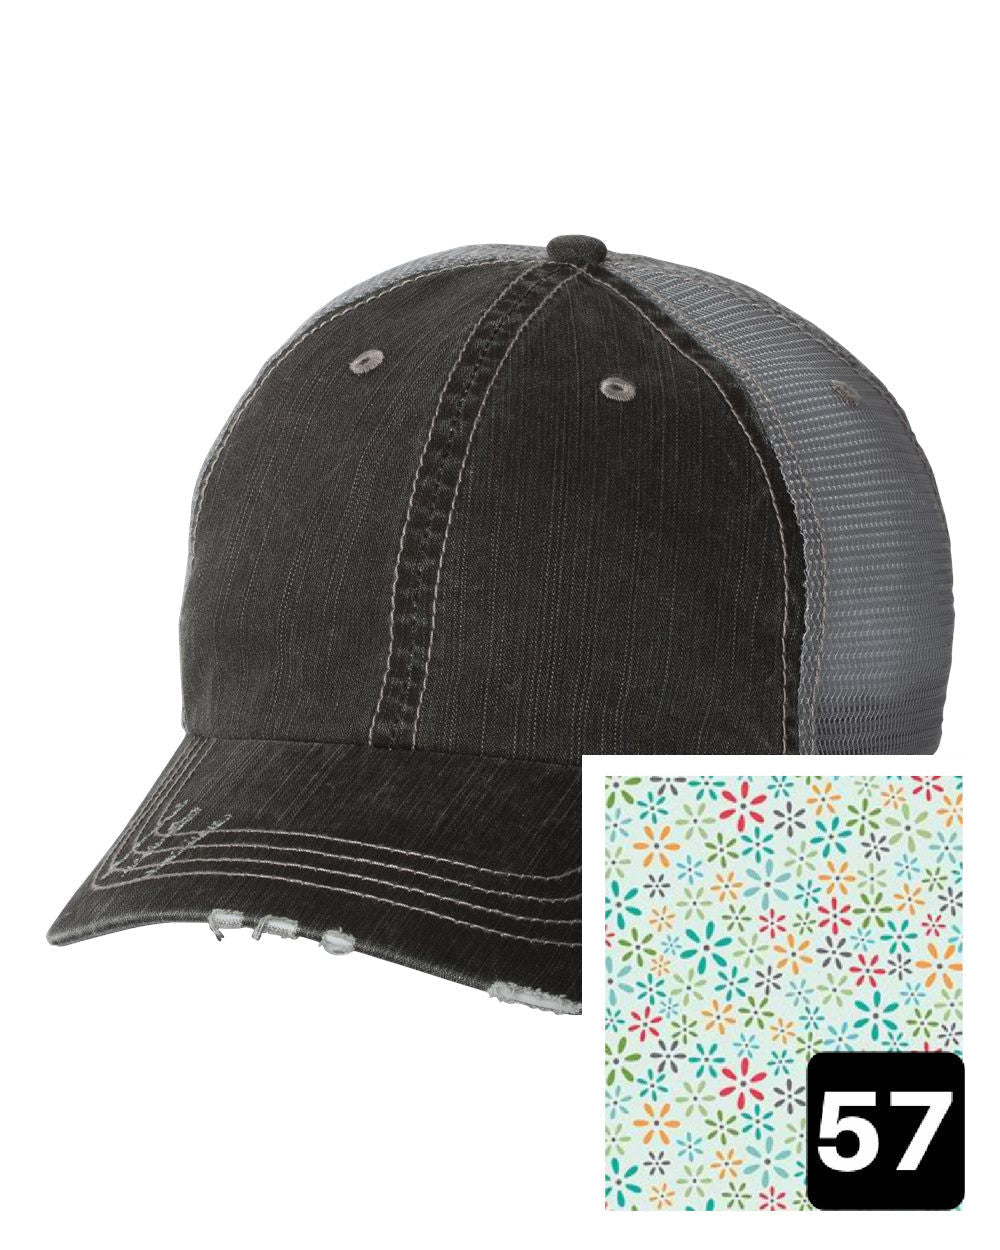 gray distressed trucker hat with white daisy on yellow fabric state of Idaho